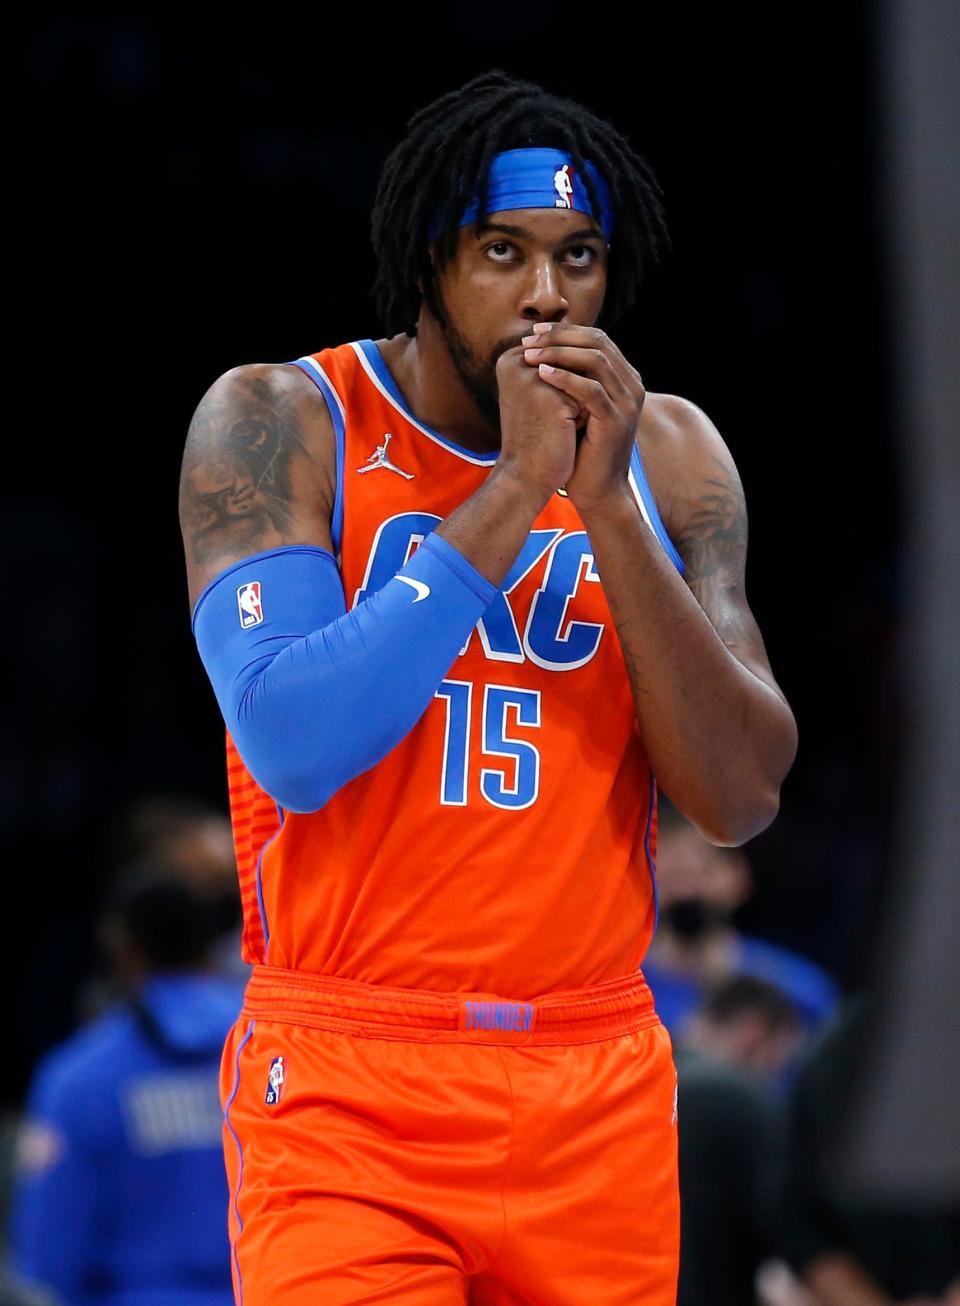 Oklahoma City's Derrick Favors (15) waits to enter the game during the NBA basketball game between the Oklahoma City Thunder and the Dallas Mavericks at the Paycom Center in Oklahoma City, Sunday, Dec. 12, 2021.